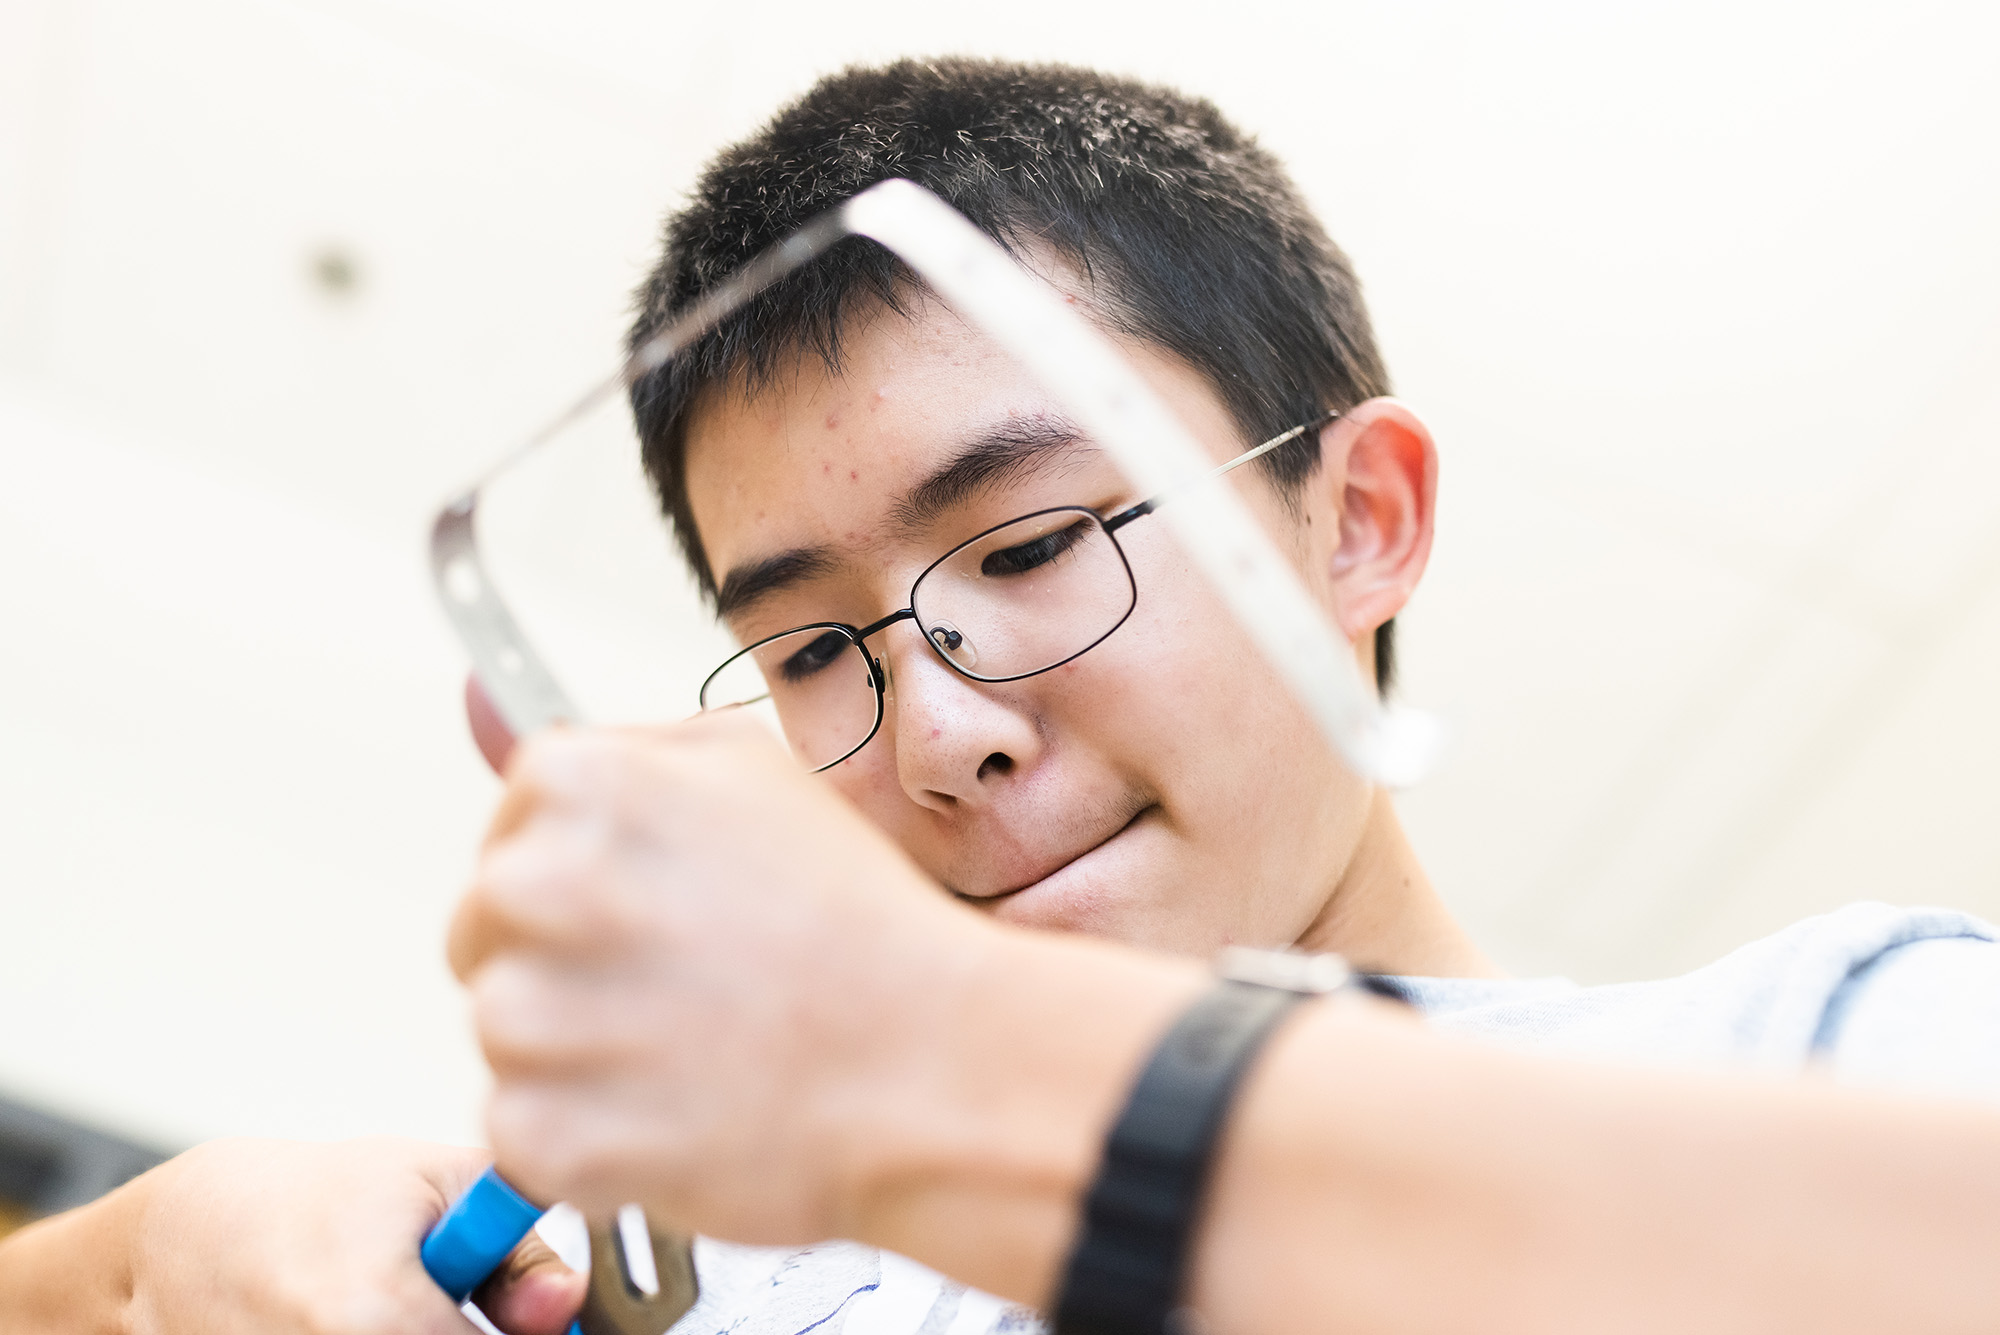 Photo: A Asian boy works on a metal strip that he is bending with pillars. He is looking down, concentrating on the object. He wears glasses and a black watch.